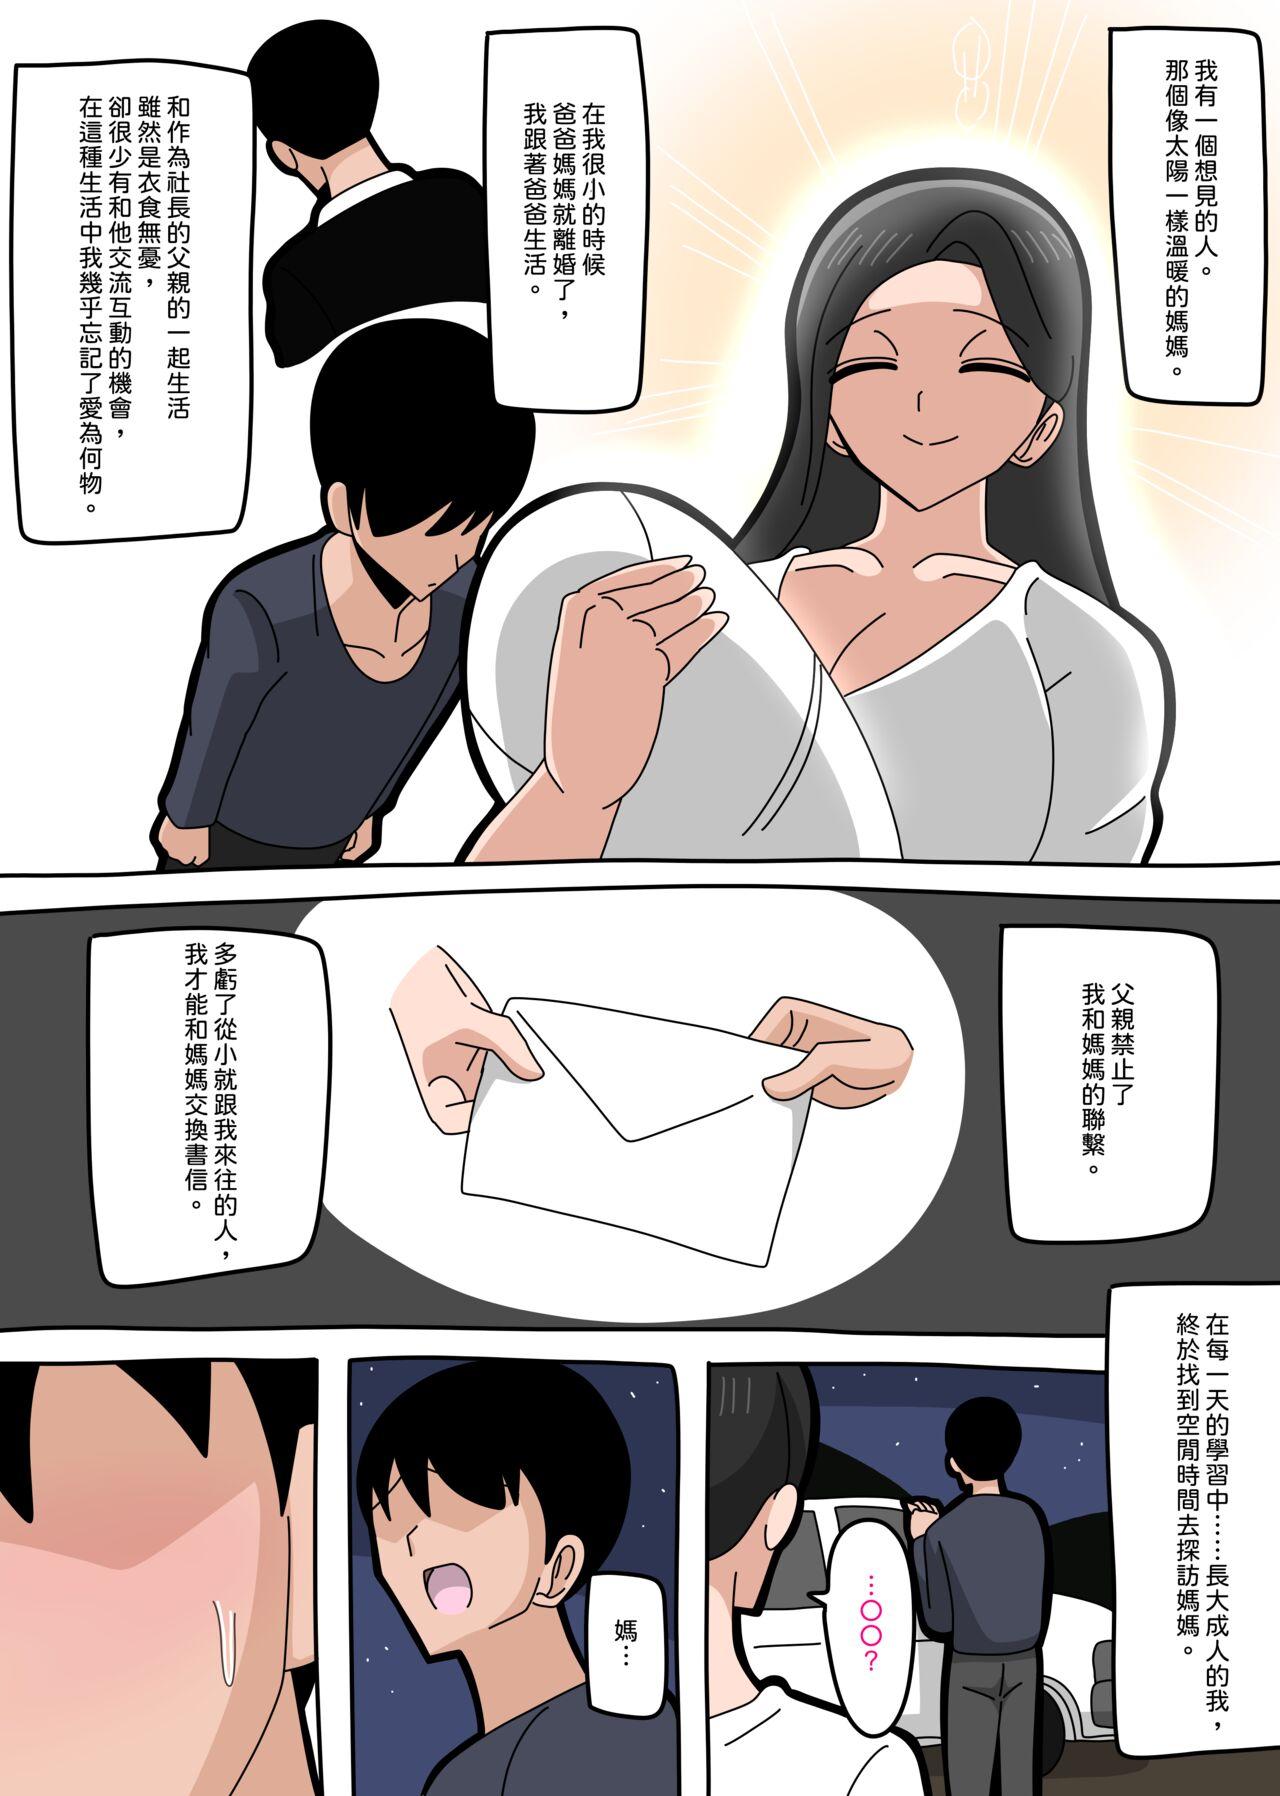 Pendeja [18master] 2023-5-24 Meeting mom again after a long separation | 與媽媽重逢… [Chinese][興趣使然的個人機翻] - Original Lezdom - Page 1